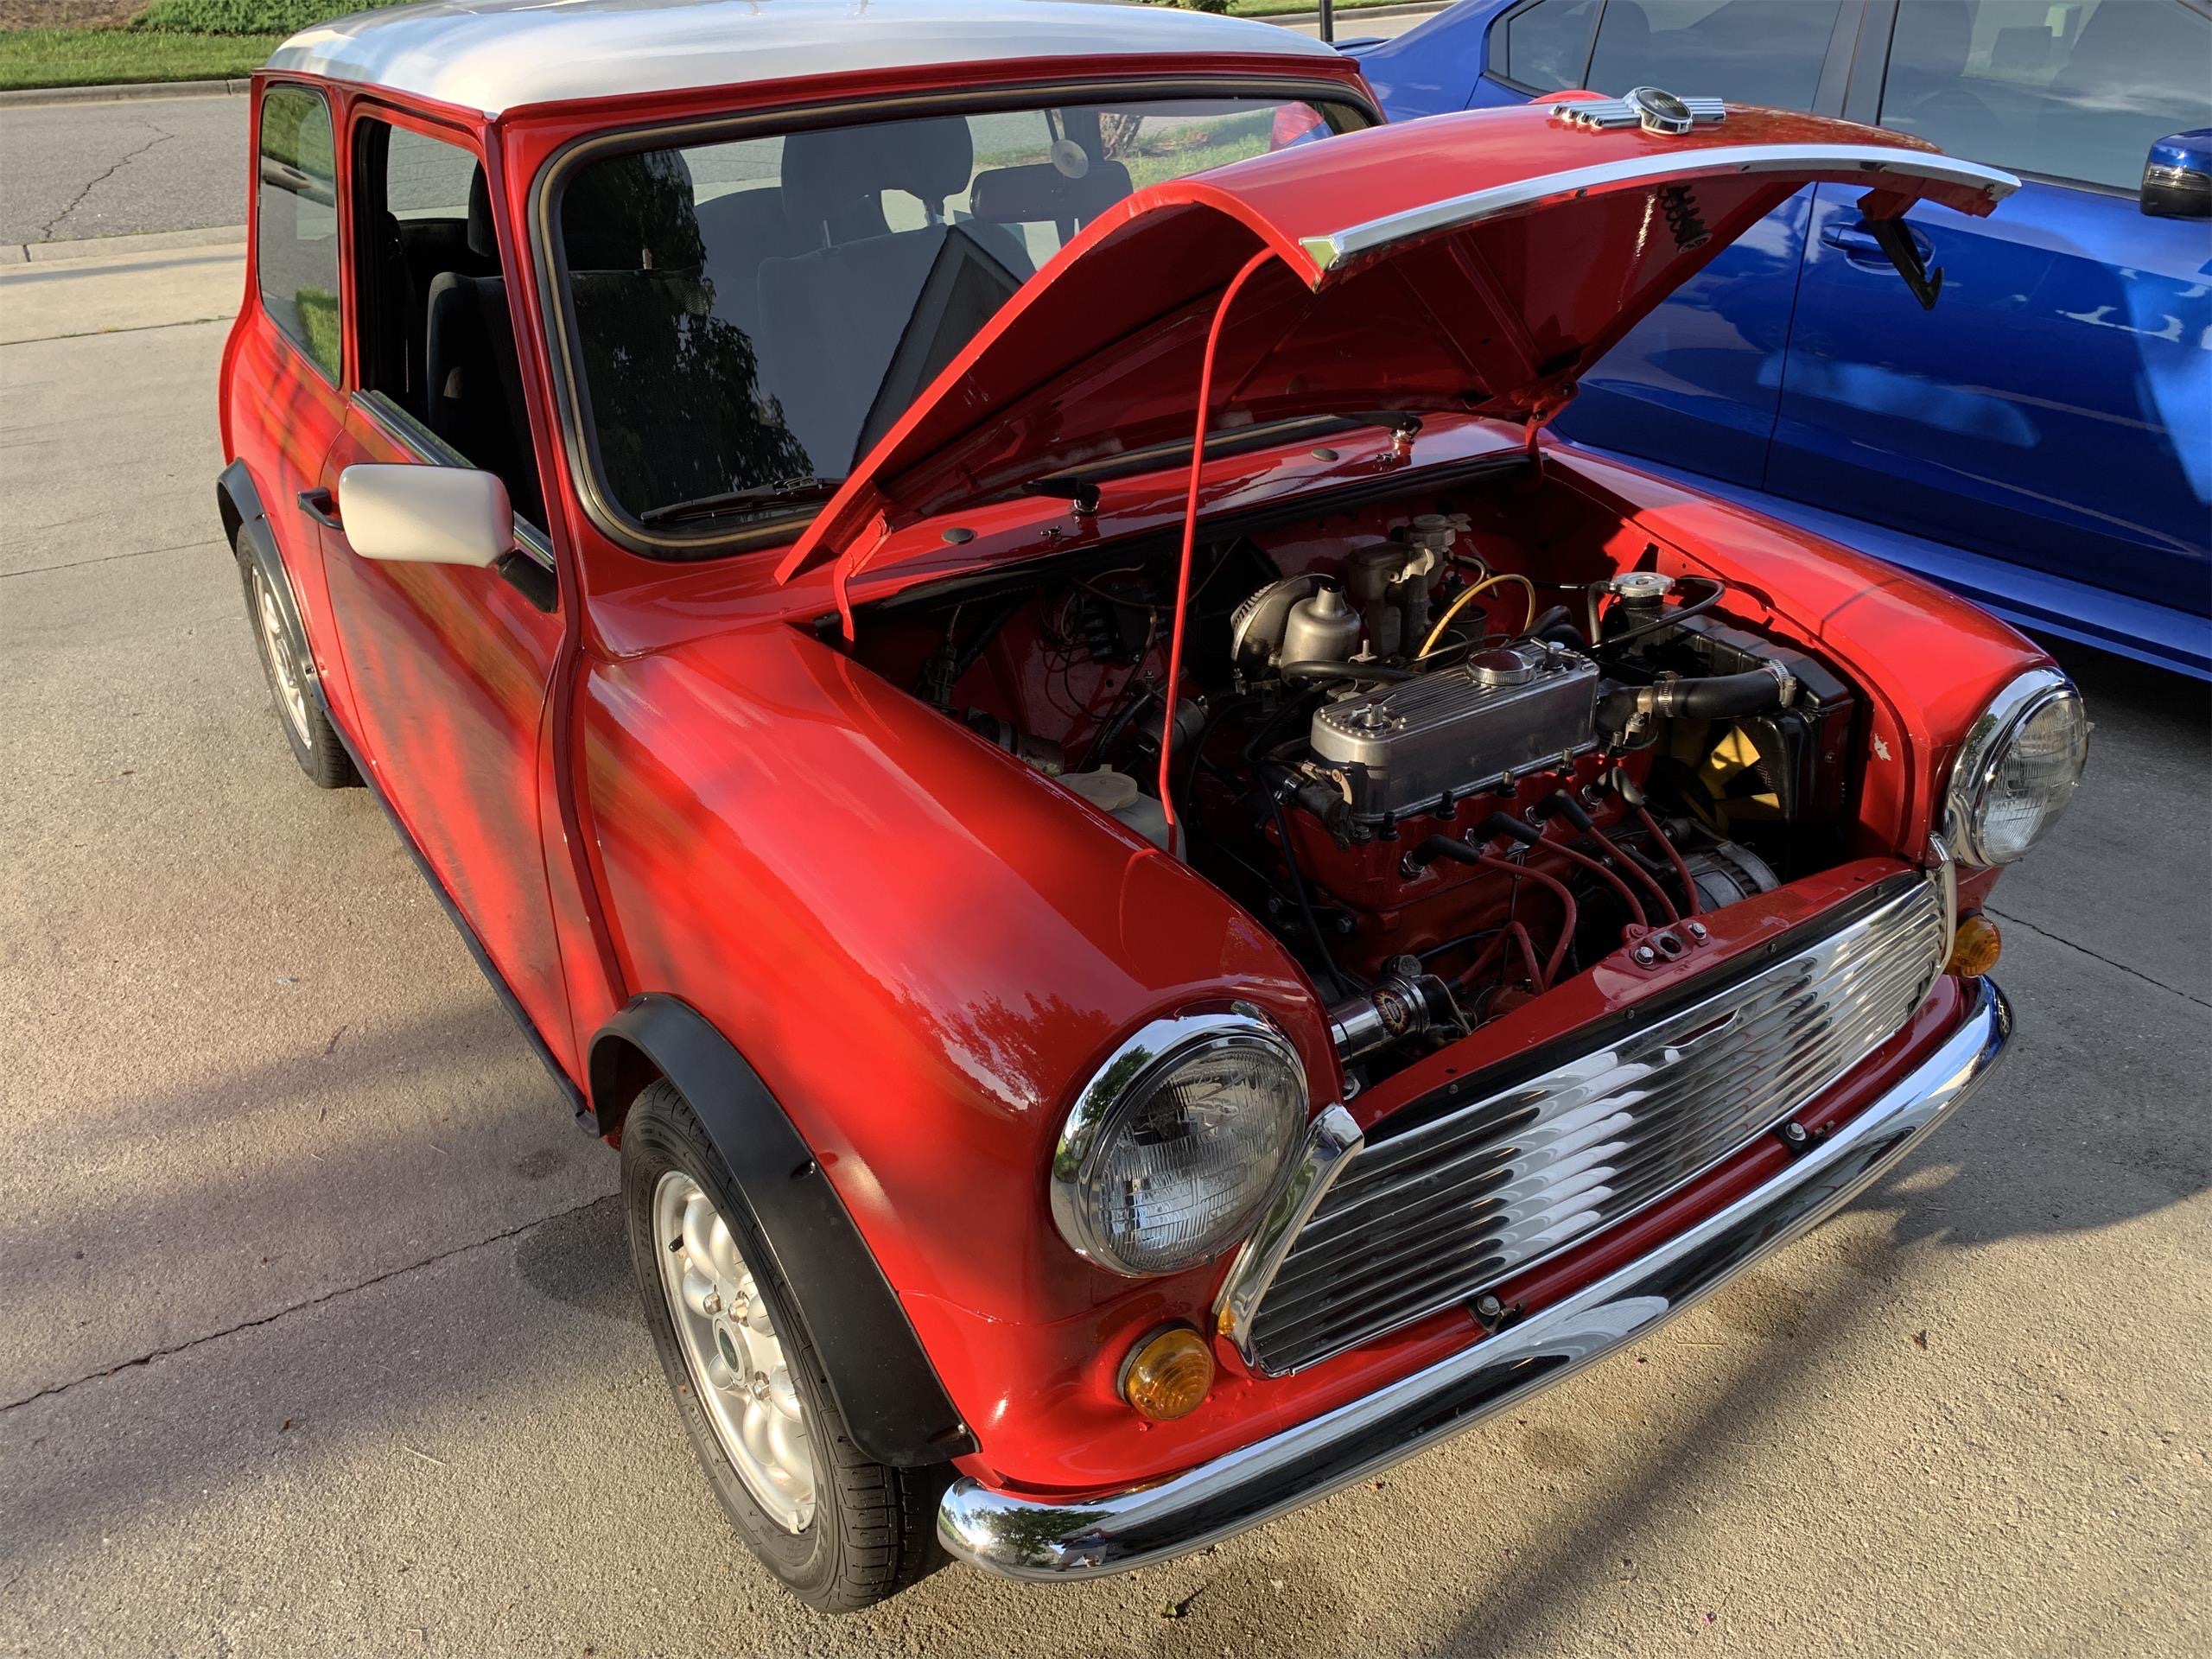 1986 Mini, Italian job: Rooted in the UK but made for Italy, ClassicCars.com Journal